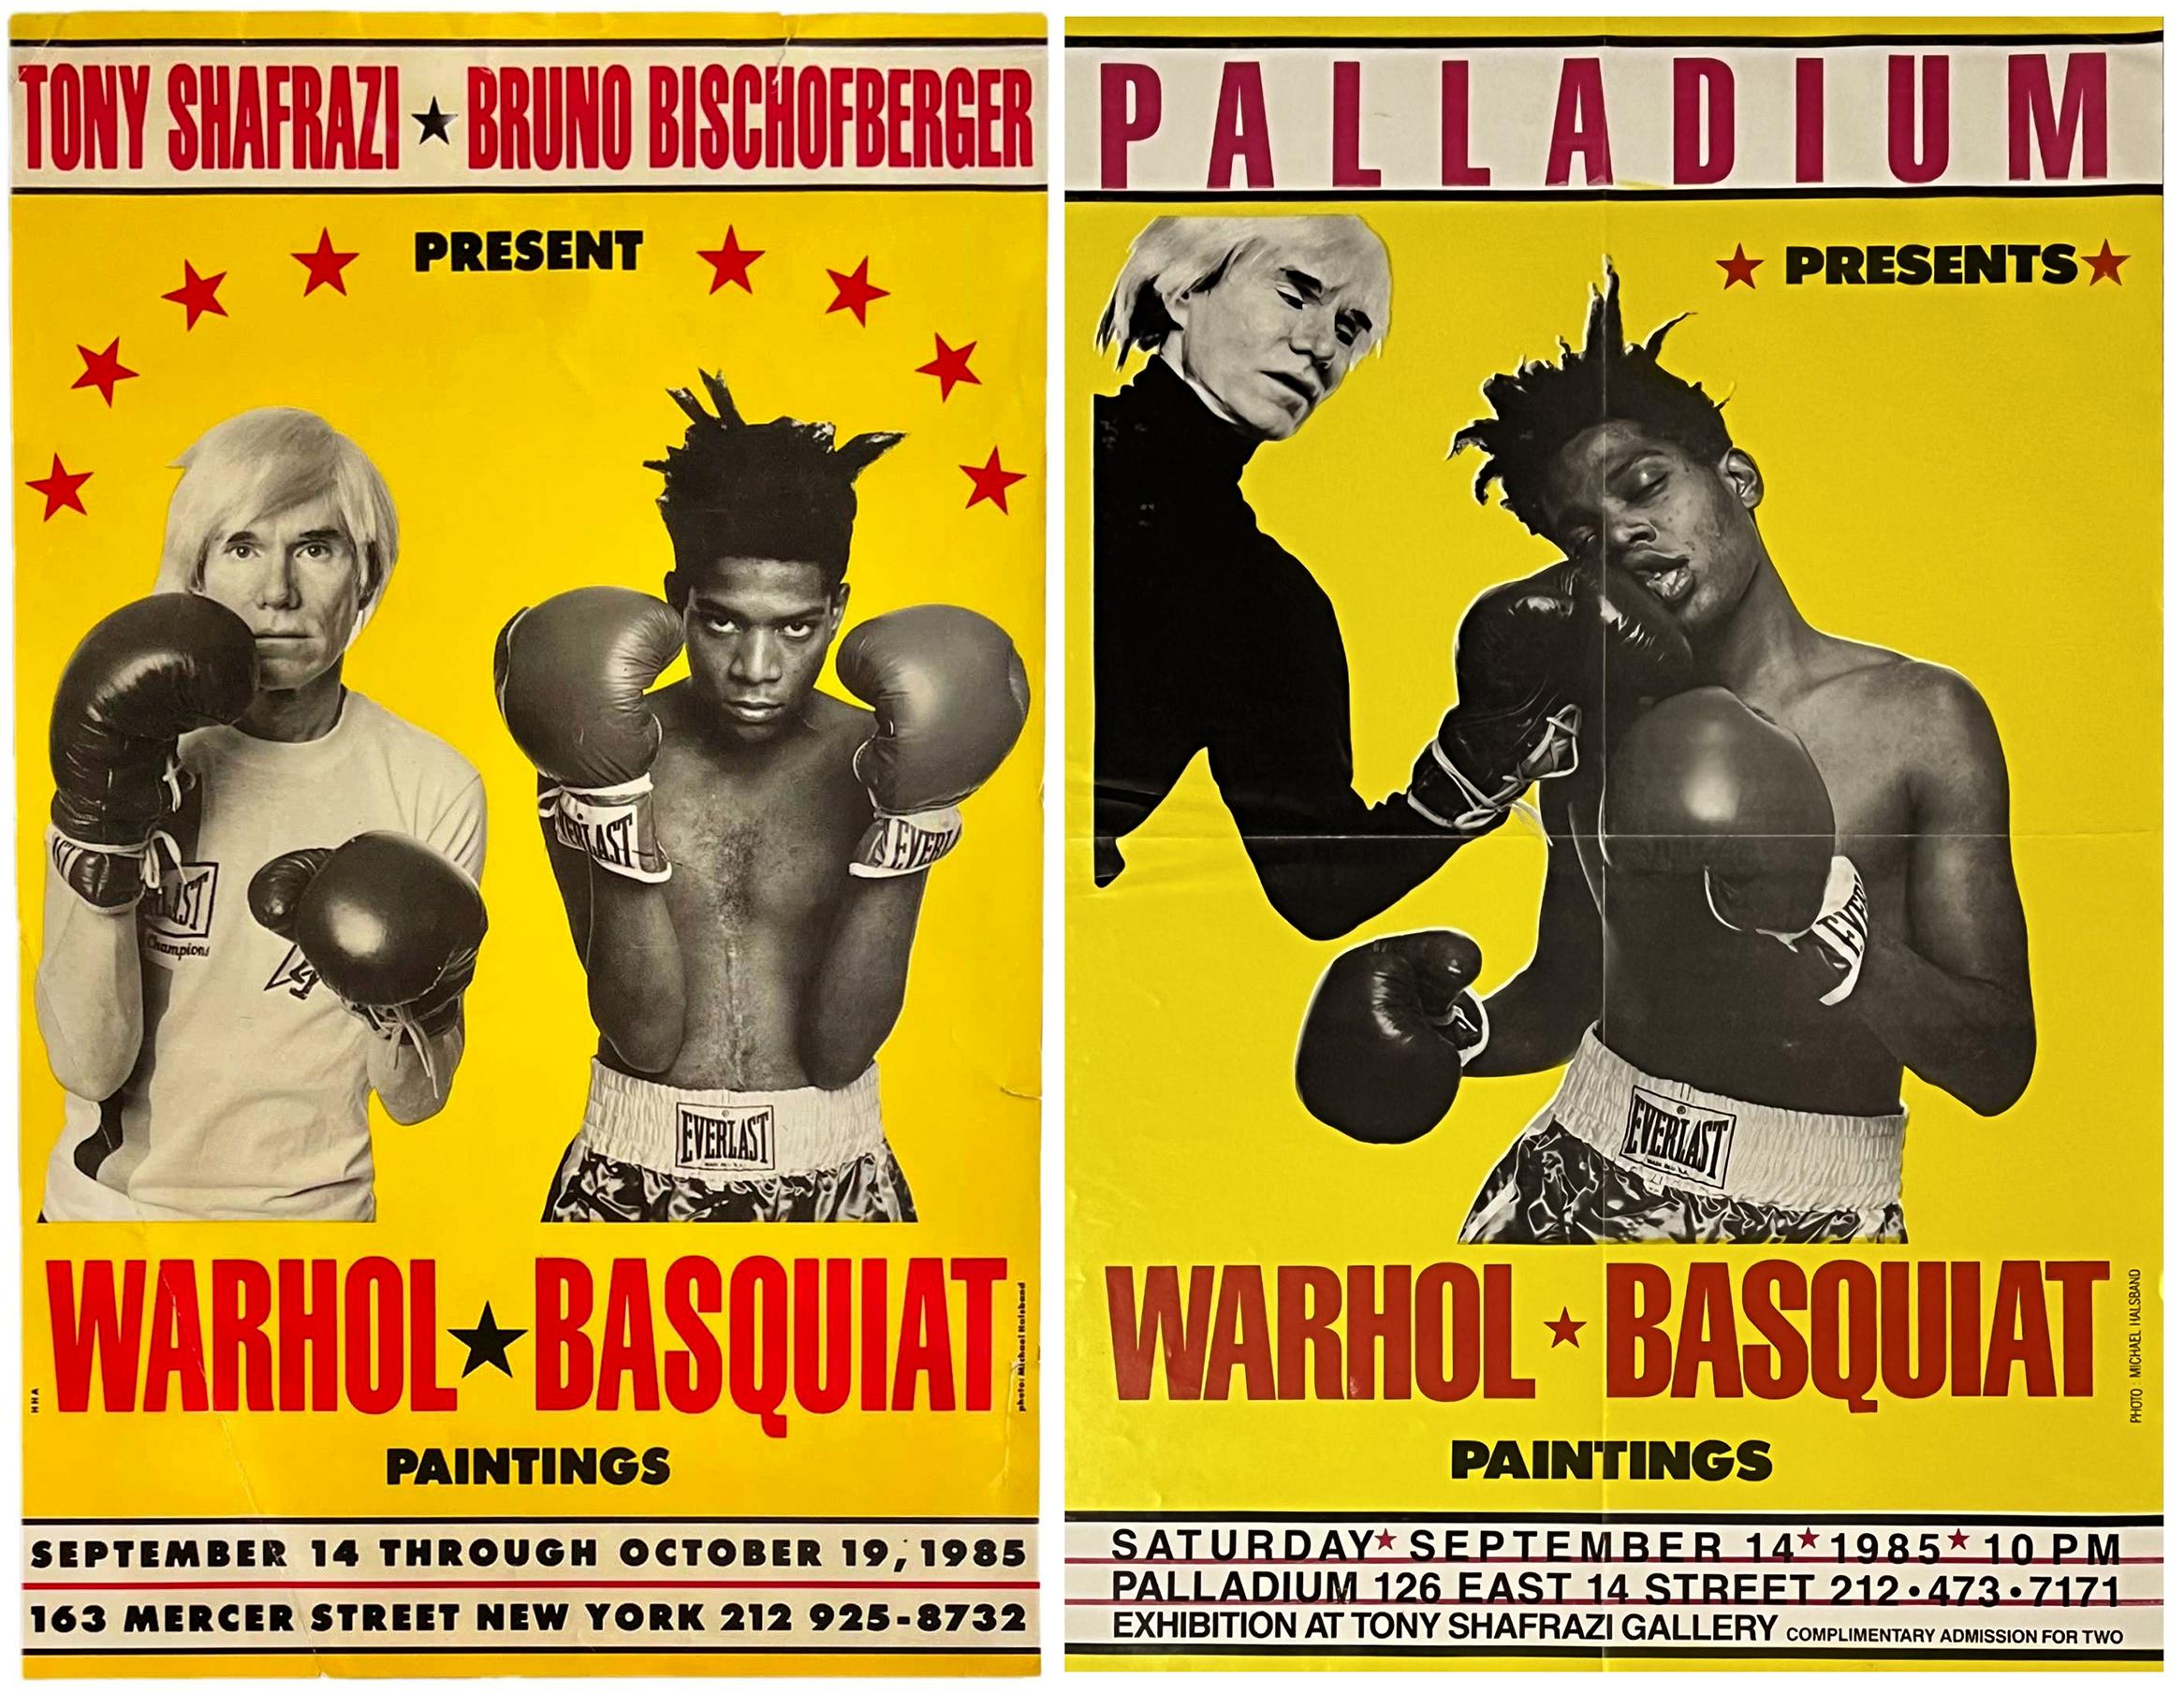 Warhol Basquiat Boxing Posters 1985 set of 2 works (Warhol Basquiat boxing 1985) - Print by Michael Halsband